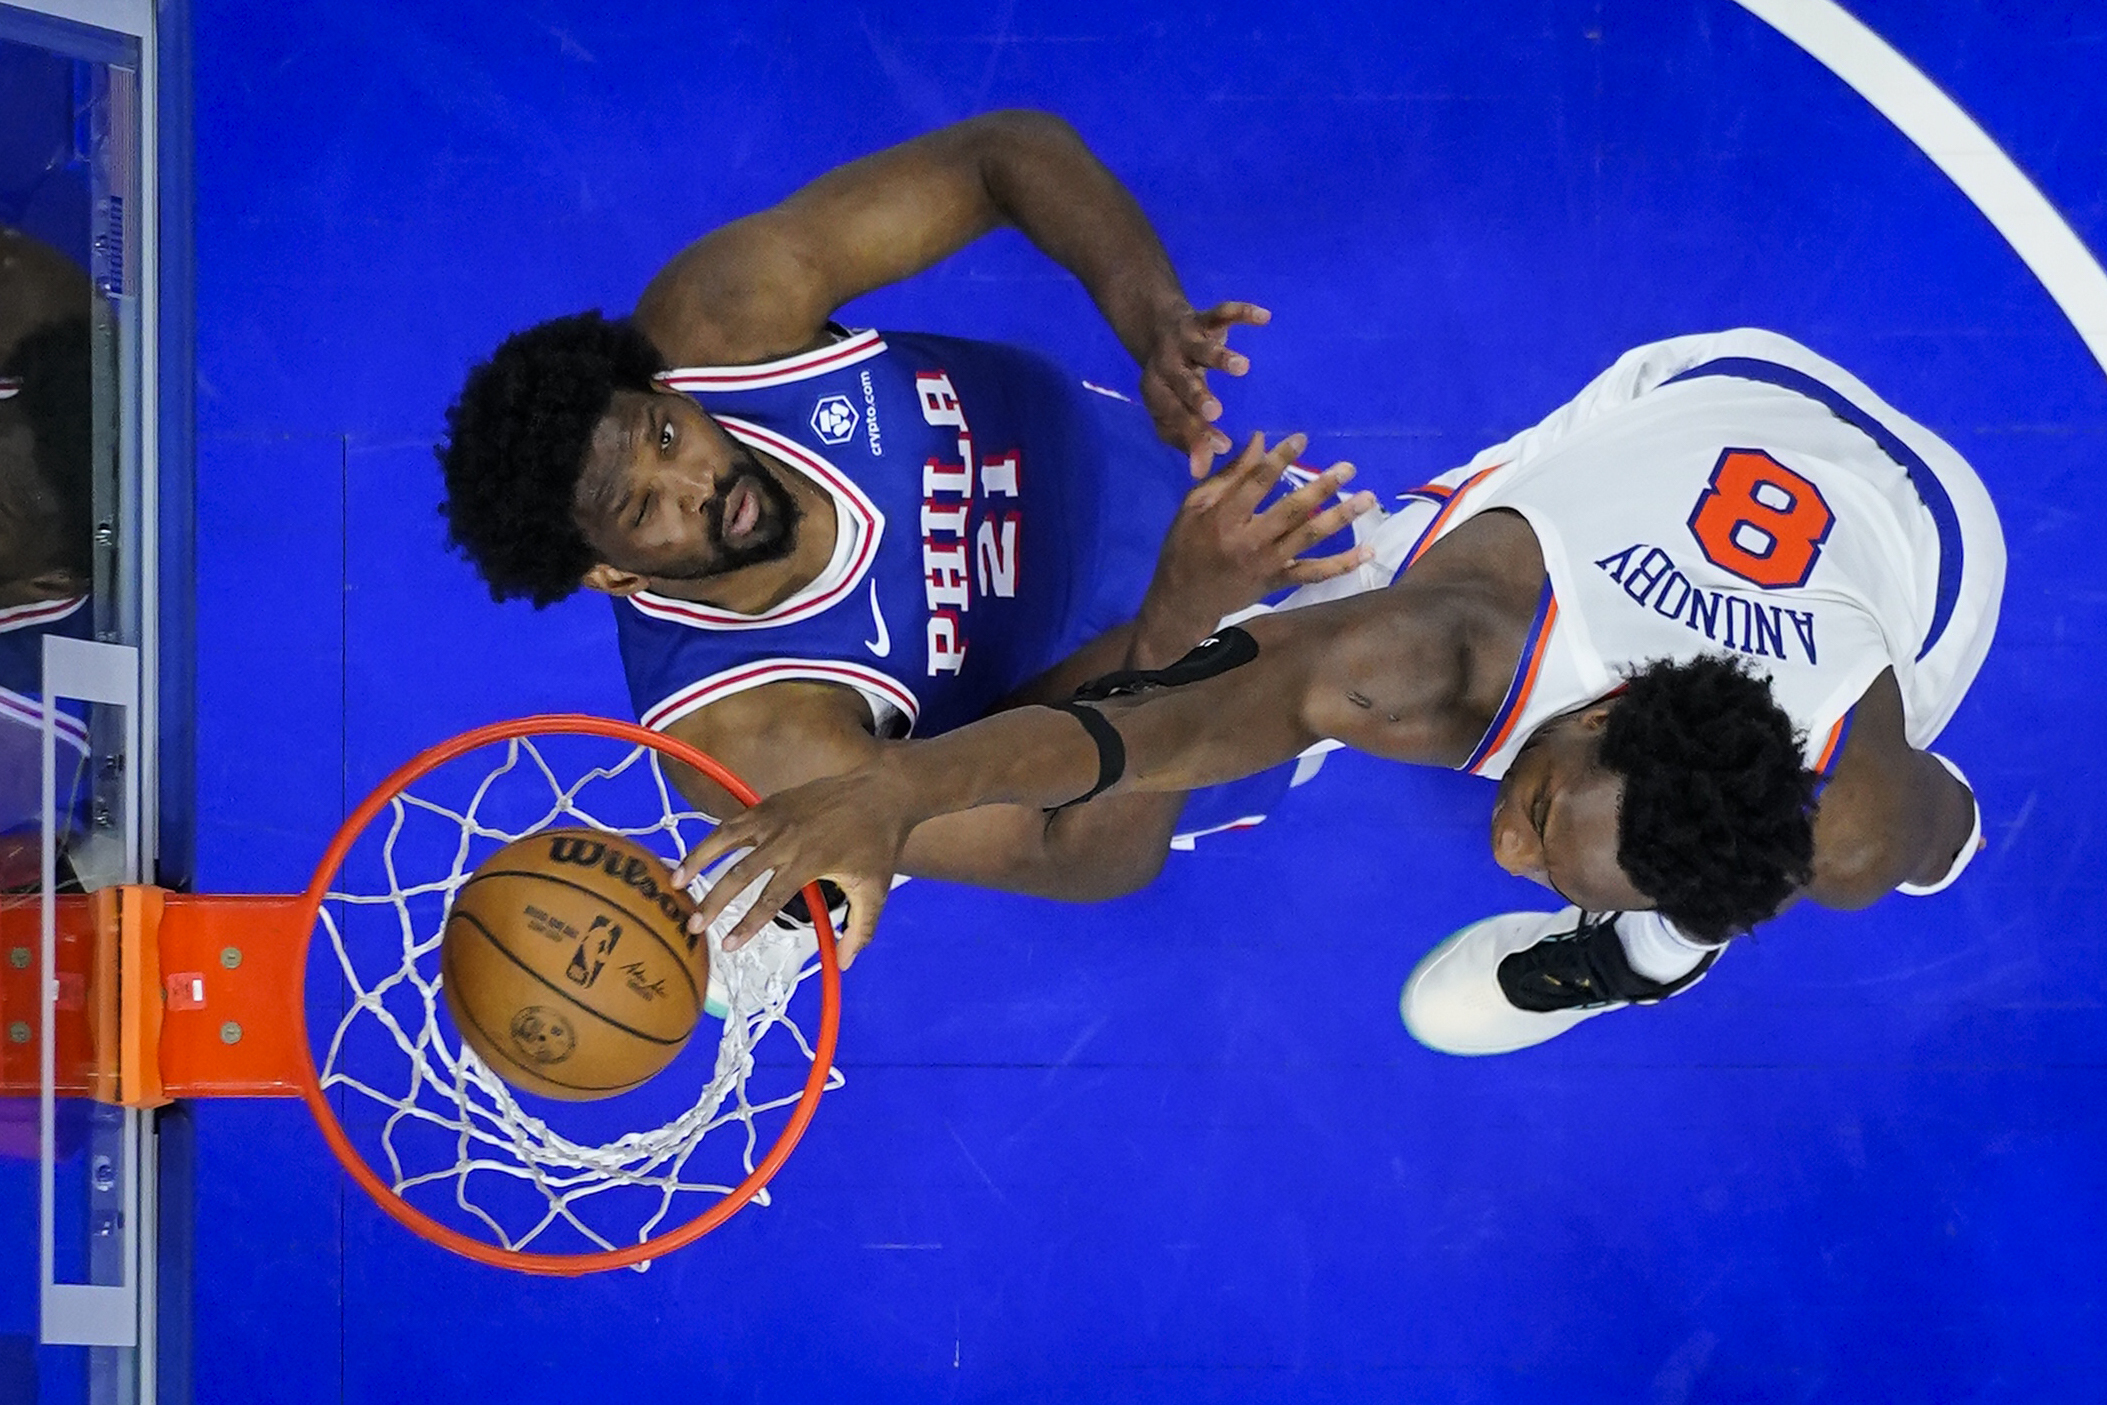 joel embiid guaranteed the 76ers would beat the knicks. he was dead wrong.